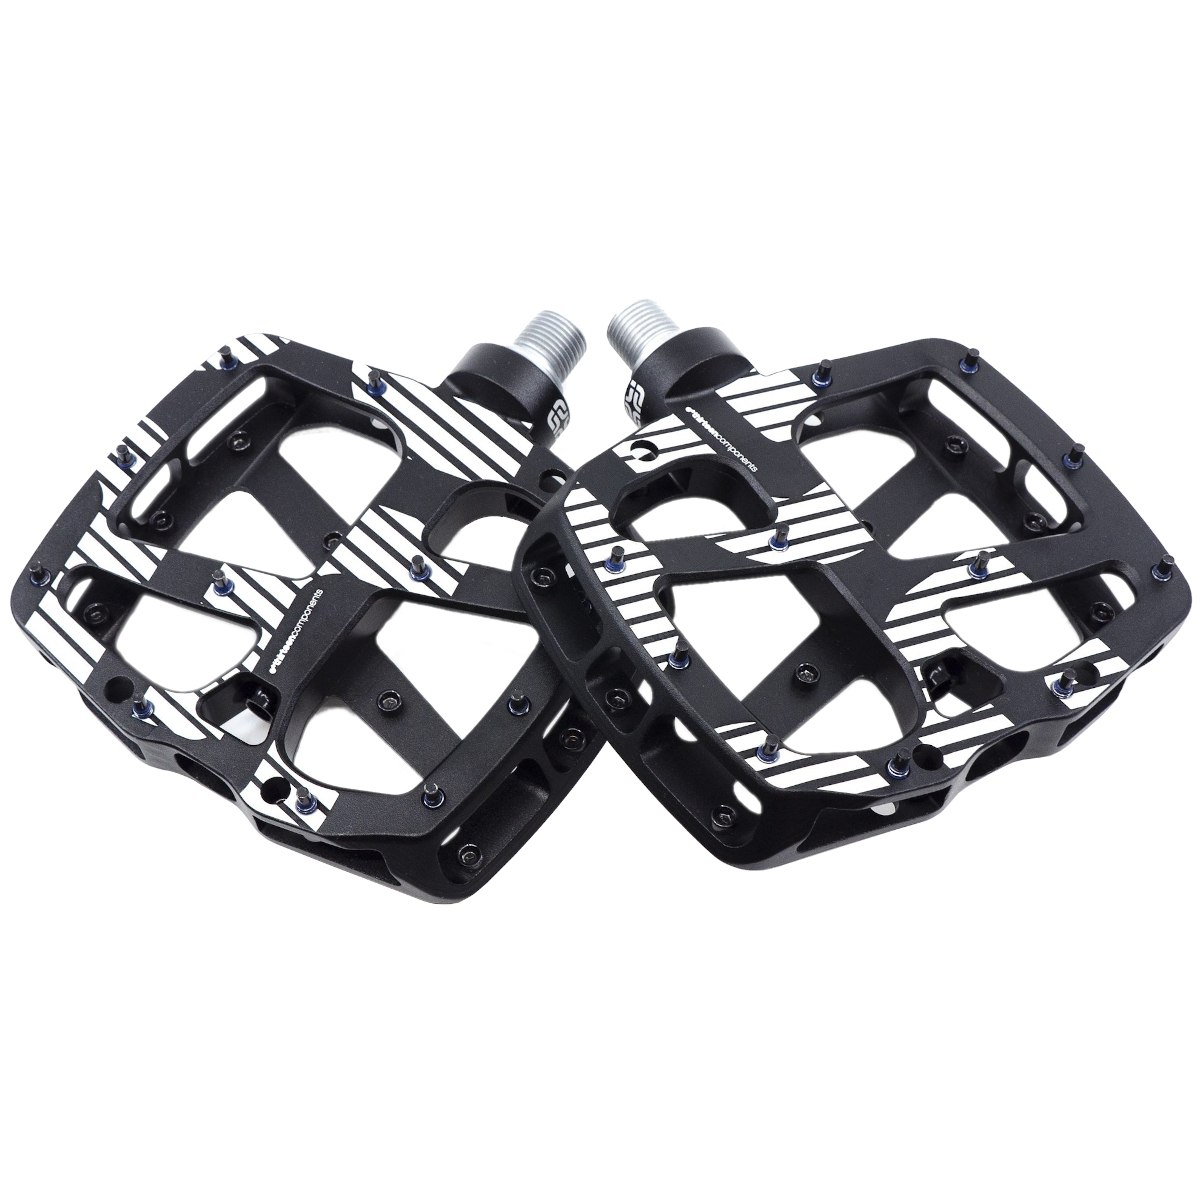 Picture of e*thirteen Plus Flat Pedals - black